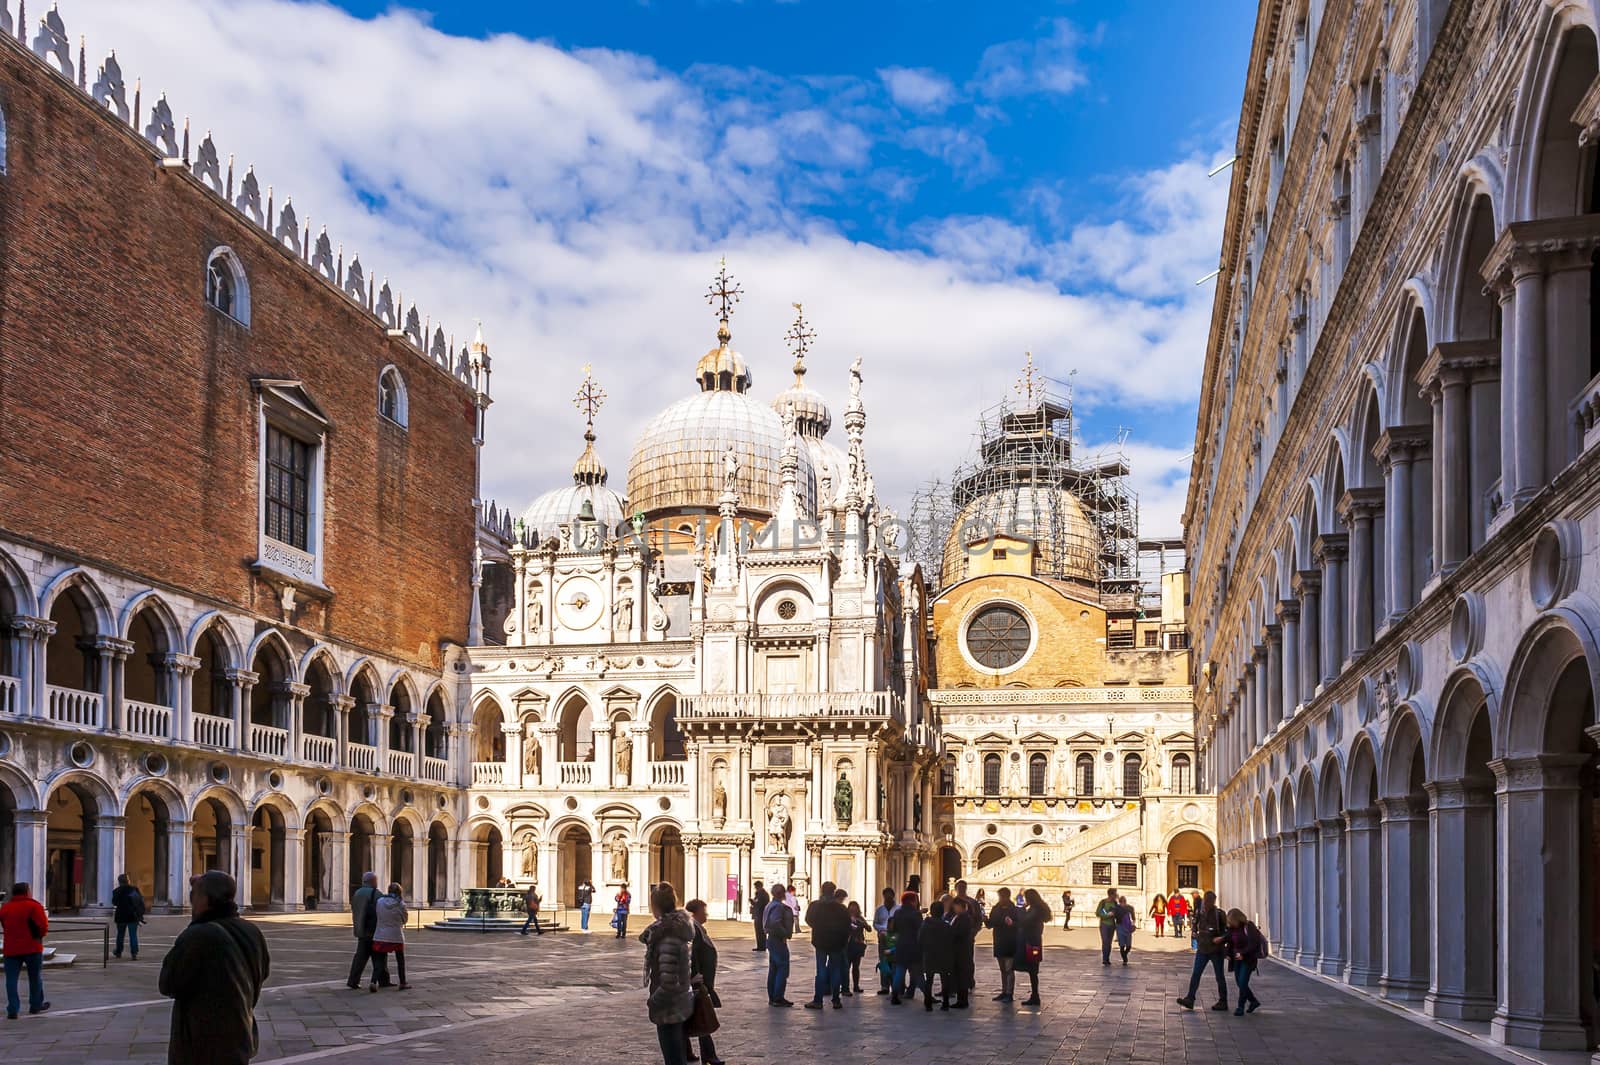 The inner courtyard of the Doge's Palace and the Basilica, Piazza San Marco in Venice in Veneto, Italy by Frederic